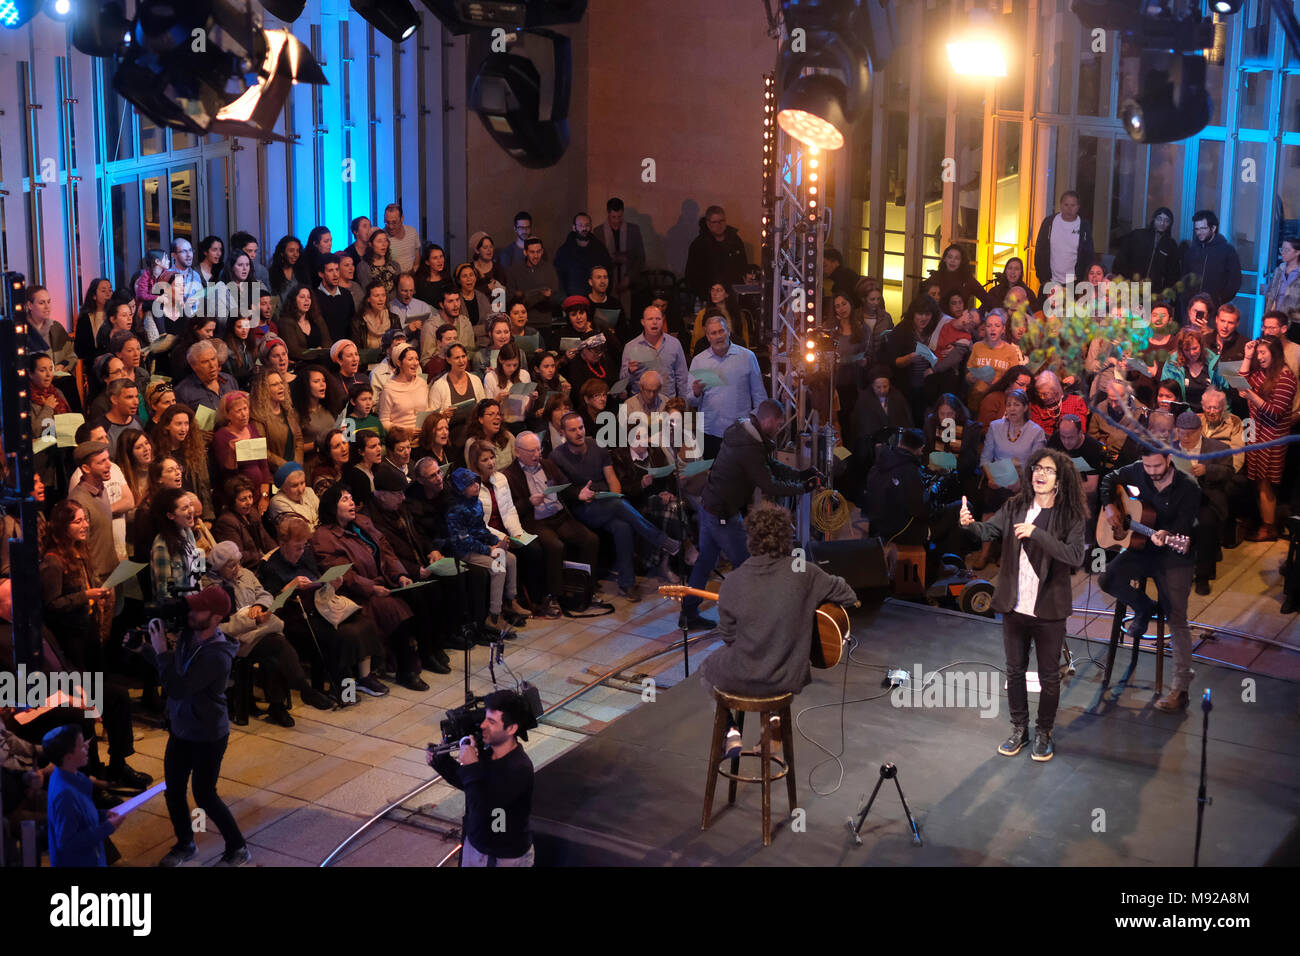 Holocaust survivors and their families gather to record live the song “Chai” or “Alive” first performed by the late international Israeli artist Ofra Haza at Beit Avi Chai Jewish culture institution in Jerusalem. Stock Photo